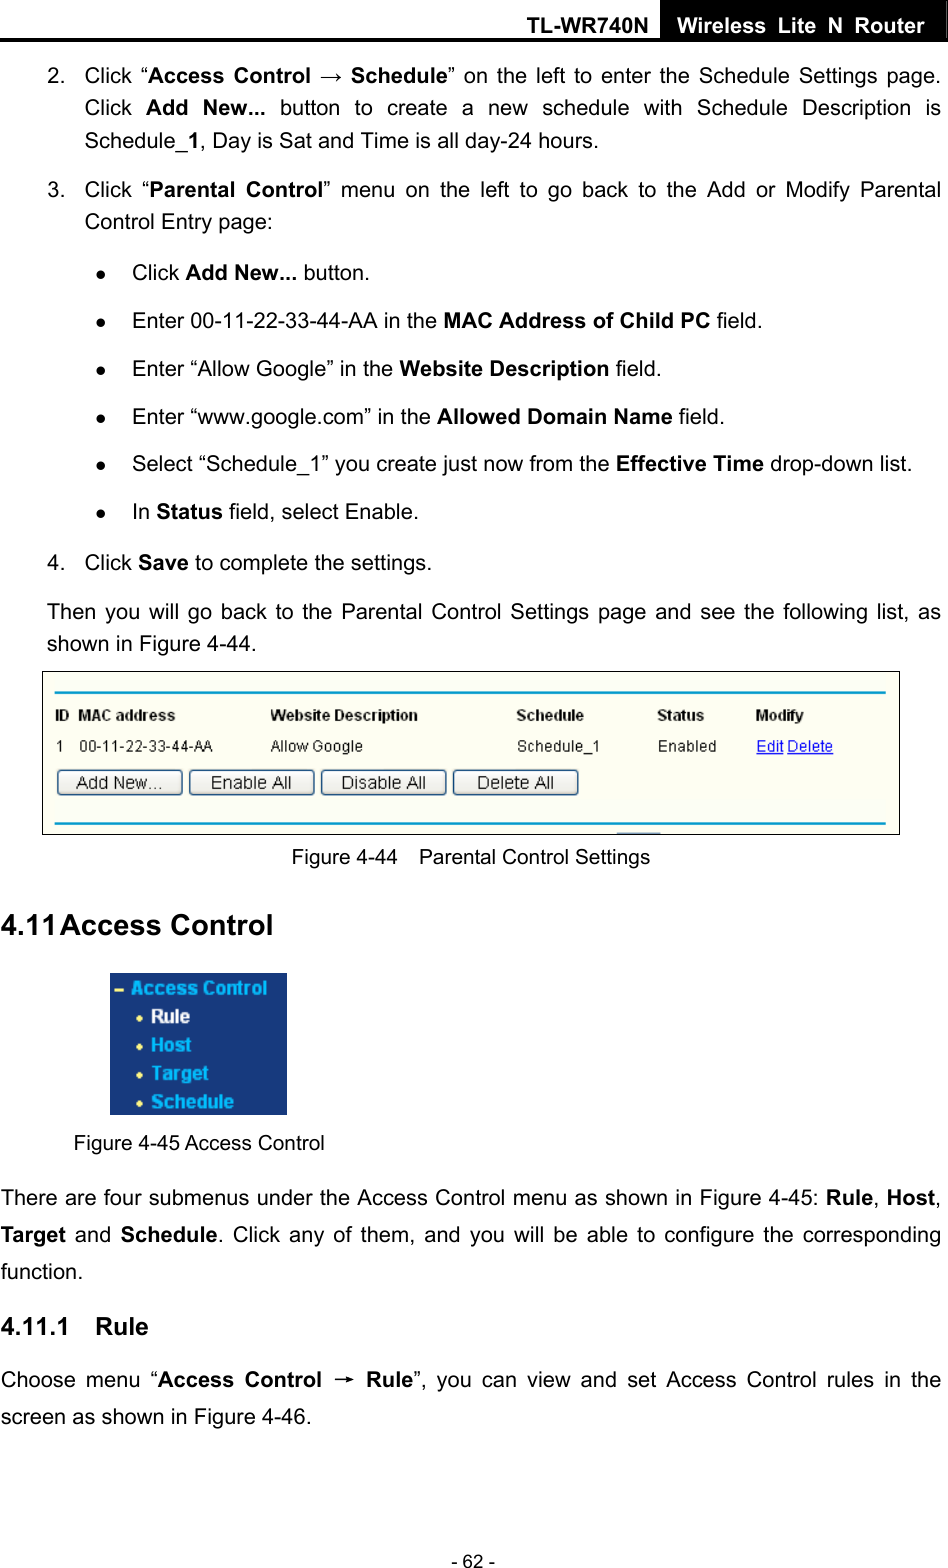 TL-WR740N Wireless Lite N Router  - 62 - 2. Click “Access Control → Schedule” on the left to enter the Schedule Settings page. Click  Add New... button to create a new schedule with Schedule Description is Schedule_1, Day is Sat and Time is all day-24 hours.   3. Click “Parental Control” menu on the left to go back to the Add or Modify Parental Control Entry page:   z Click Add New... button.   z Enter 00-11-22-33-44-AA in the MAC Address of Child PC field.   z Enter “Allow Google” in the Website Description field.   z Enter “www.google.com” in the Allowed Domain Name field.   z Select “Schedule_1” you create just now from the Effective Time drop-down list.   z In Status field, select Enable.   4. Click Save to complete the settings. Then you will go back to the Parental Control Settings page and see the following list, as shown in Figure 4-44.  Figure 4-44    Parental Control Settings 4.11 Access Control  Figure 4-45 Access Control There are four submenus under the Access Control menu as shown in Figure 4-45: Rule, Host, Target and Schedule. Click any of them, and you will be able to configure the corresponding function. 4.11.1  Rule Choose menu “Access Control → Rule”, you can view and set Access Control rules in the screen as shown in Figure 4-46.   